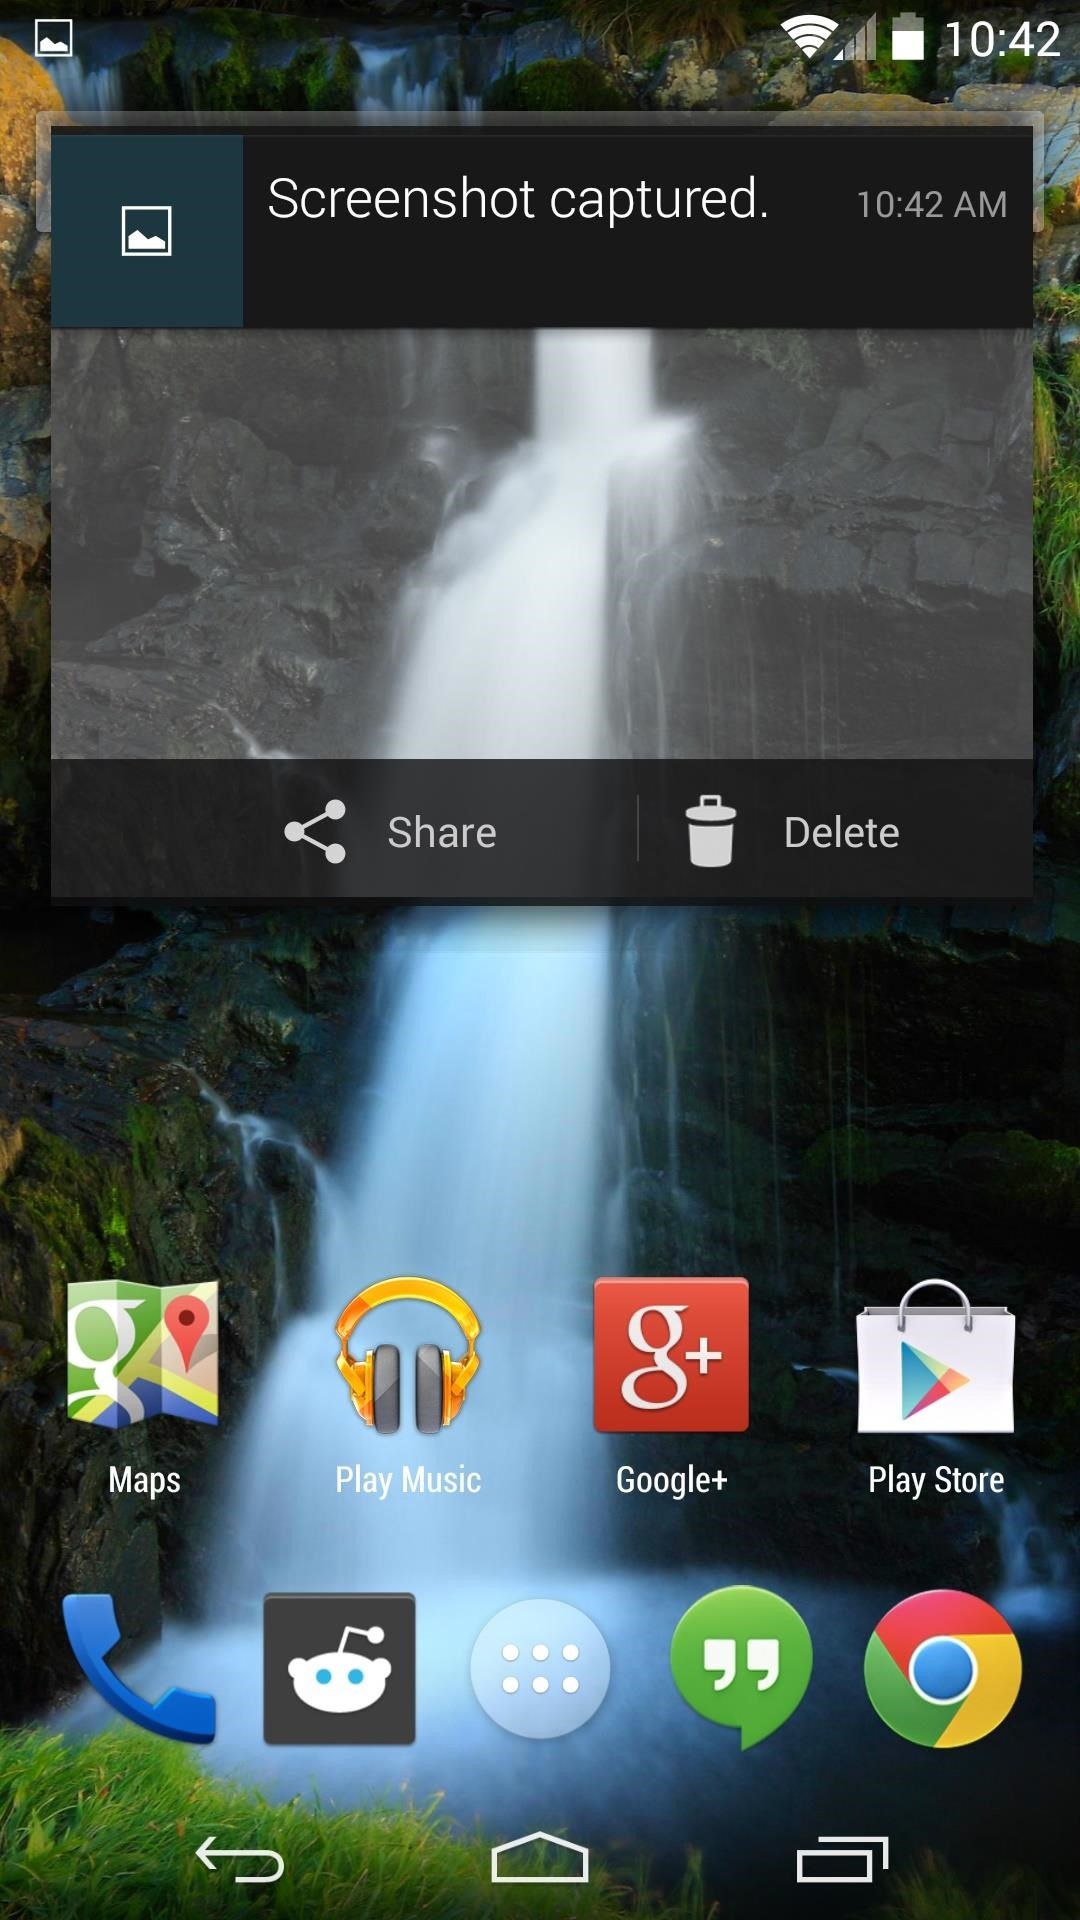 How to Get the New Android L "Heads Up" Notifications on Your Nexus 5 or Other Android Device